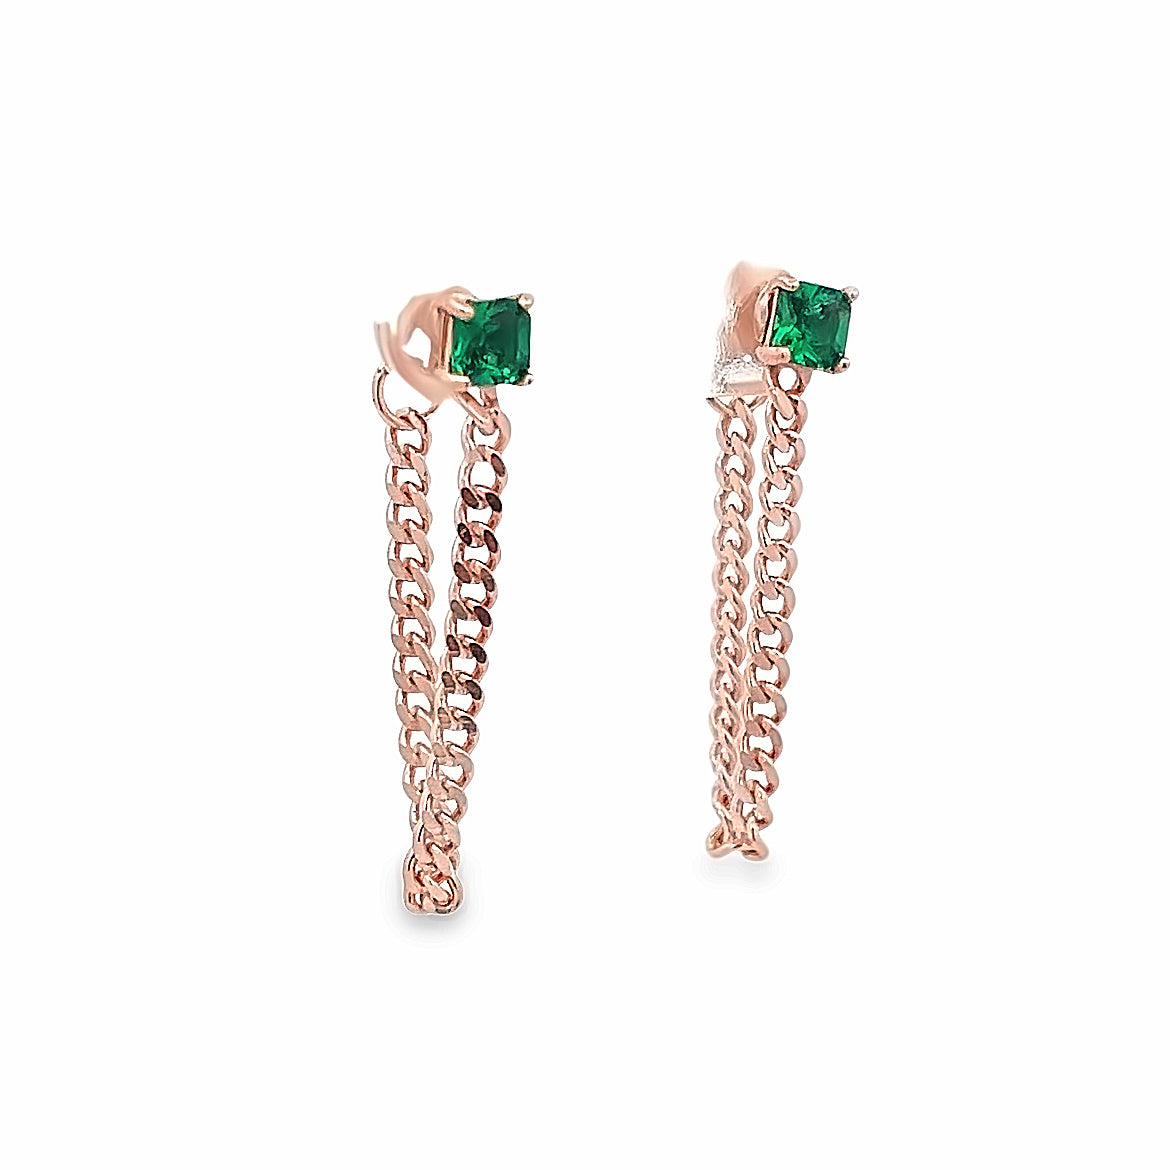 925 SILVER ROSE GOLD CHAIN EARRINGS WITH GREEN CRYSTALS